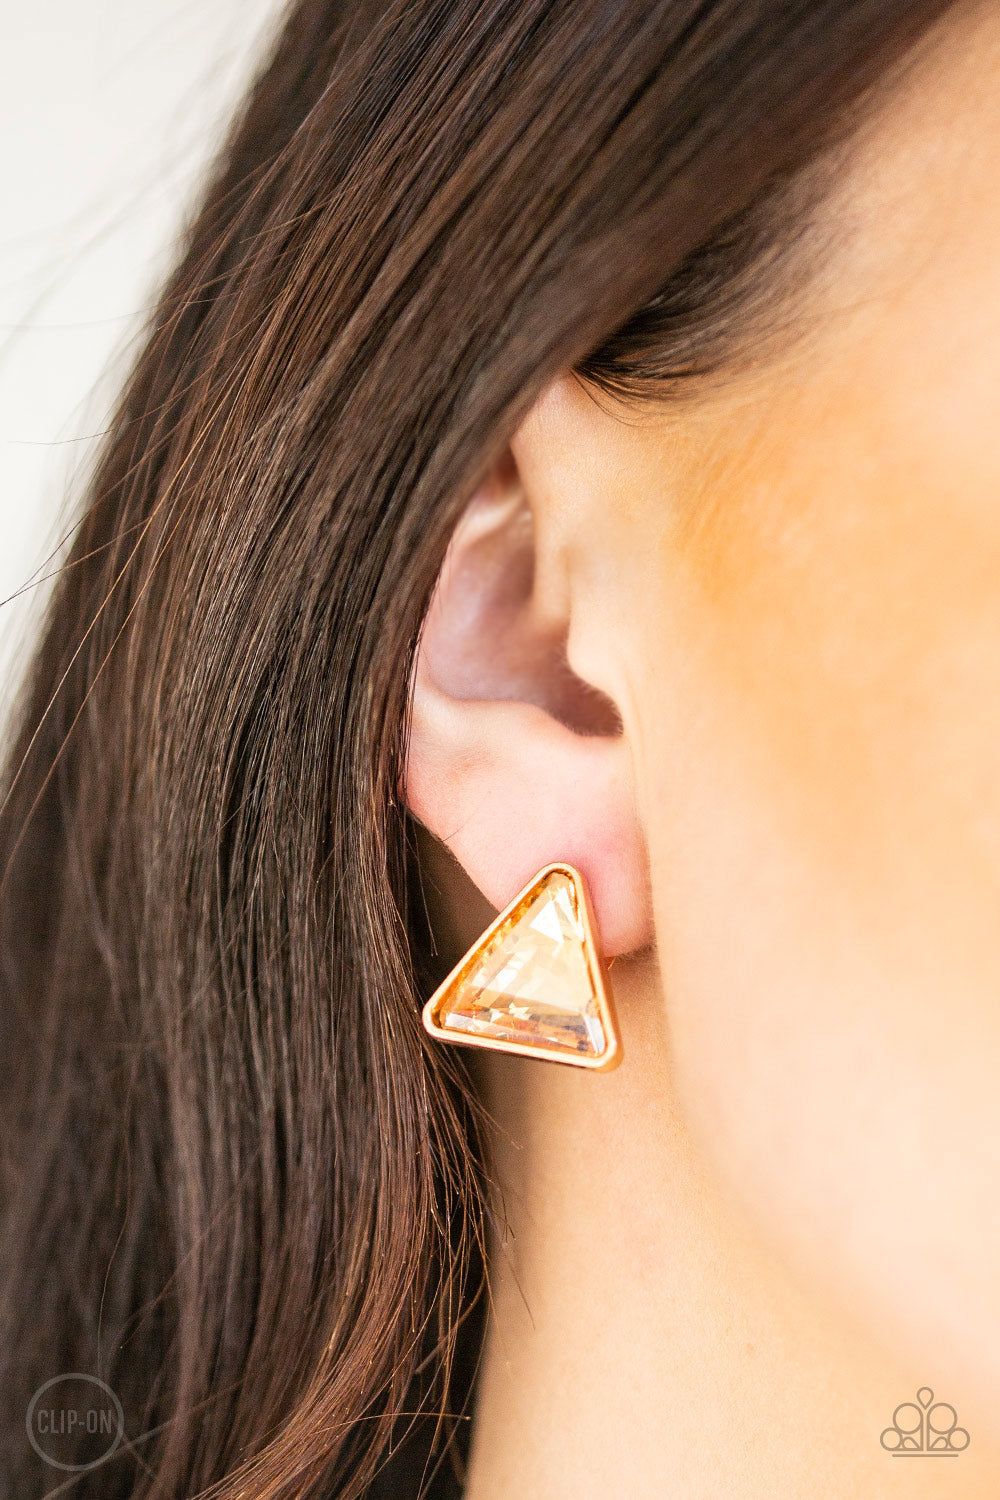 Timeless In Triangles - Gold Item #E156 Featuring a triangle-cut, a golden gem is pressed into a sleek gold frame for a timeless look. Earring attaches to a standard clip-on fitting. All Paparazzi Accessories are lead free and nickel free!  Sold as one pair of clip-on earrings.